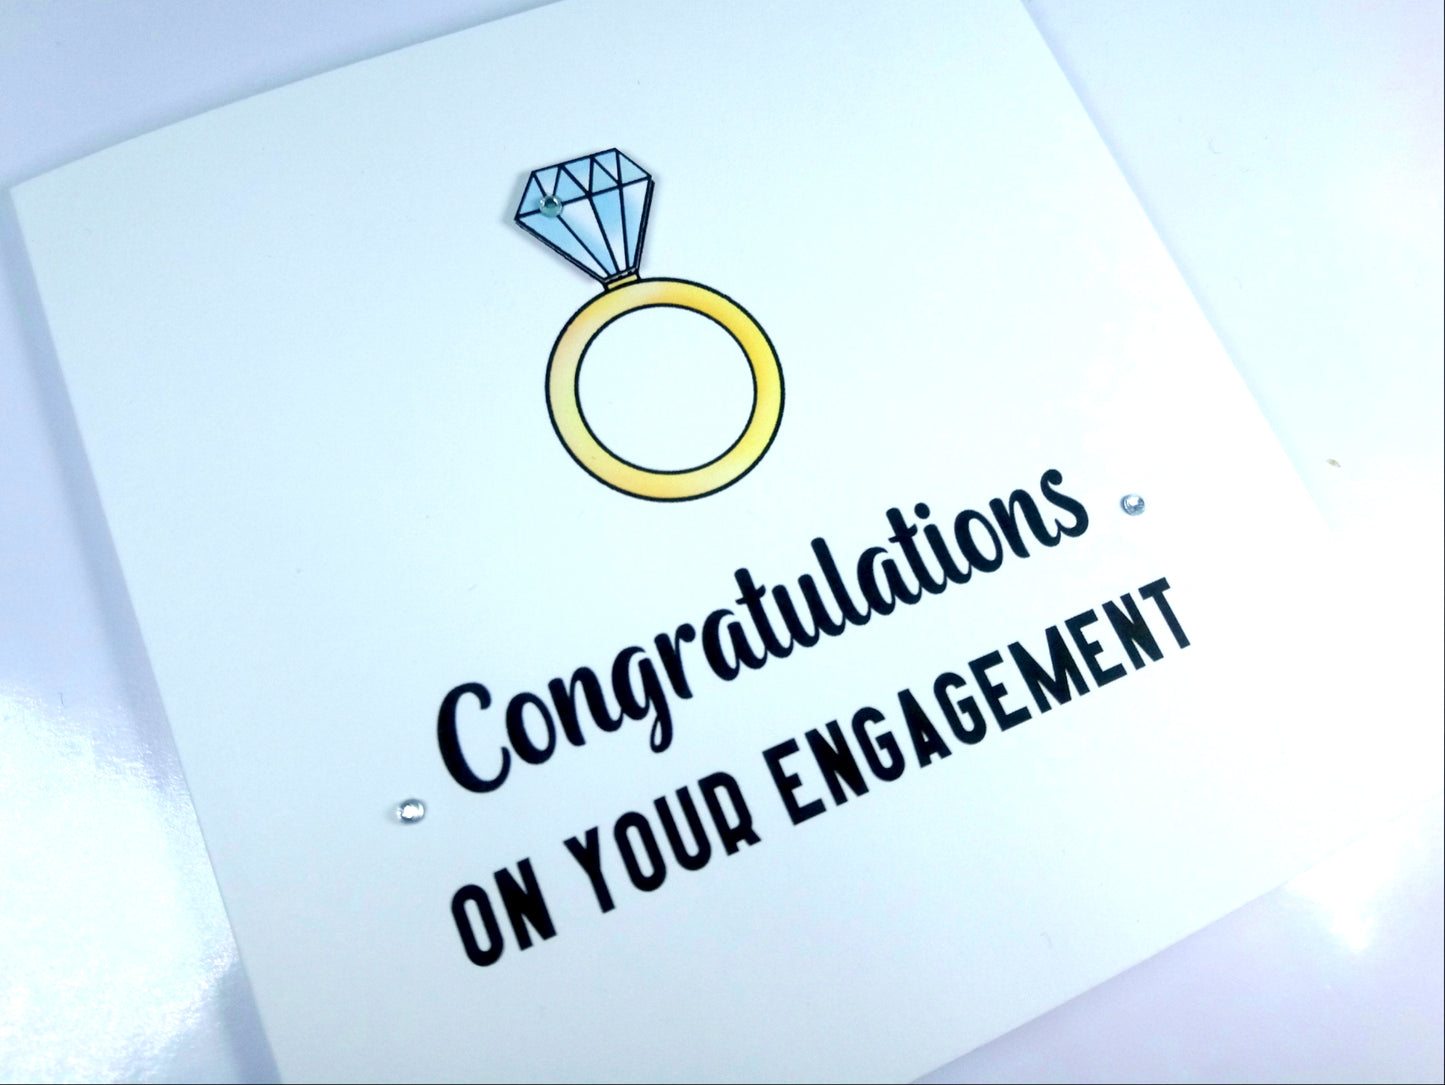 Congratulations on your Engagement Card - Ring